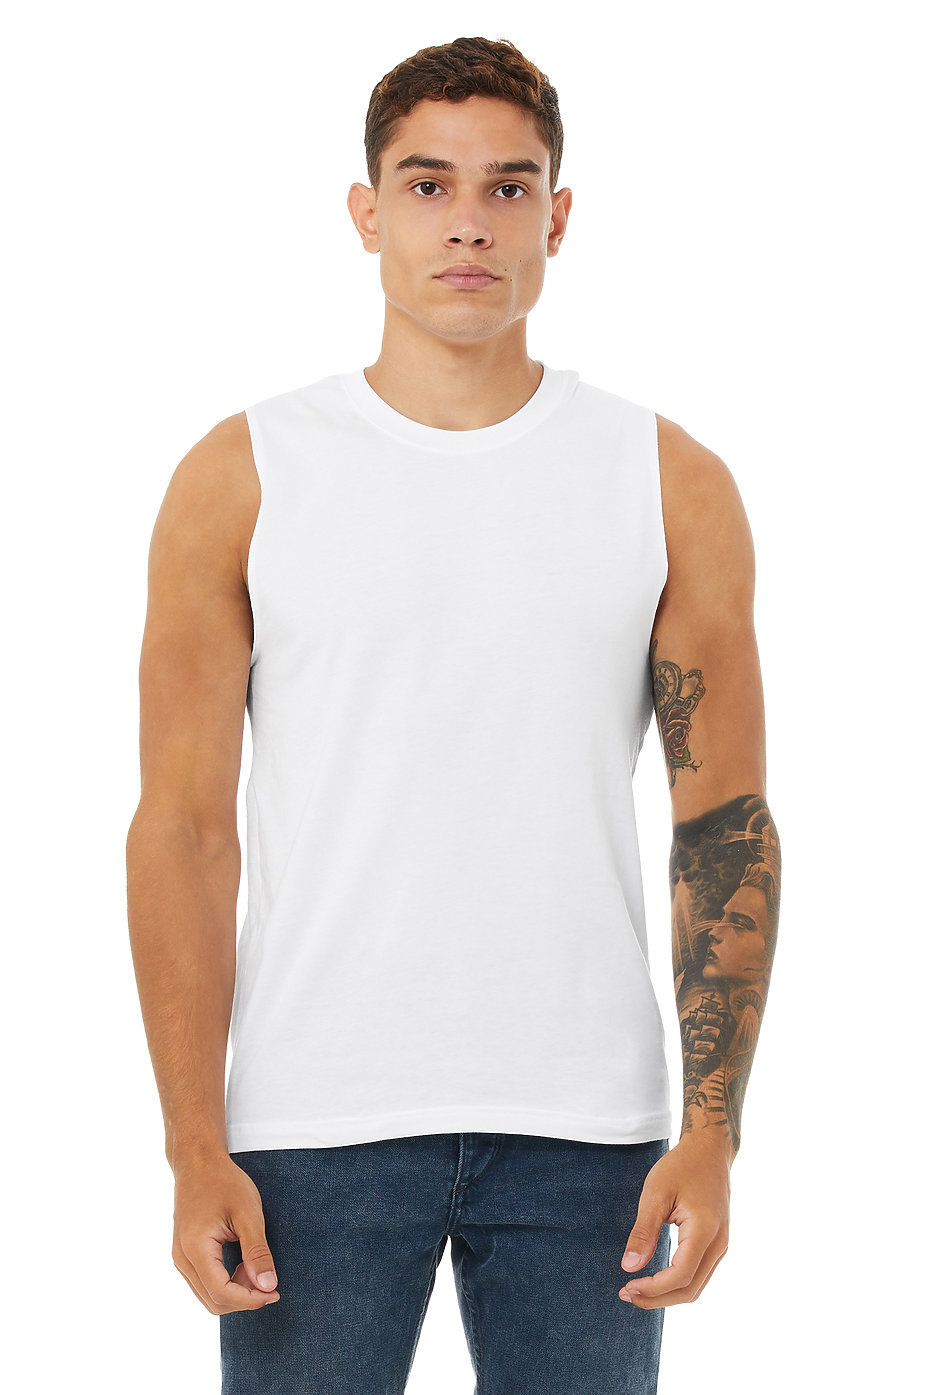 StarTee Dropped Arm Muscle Tank Top Size Chart for Strong Athletic